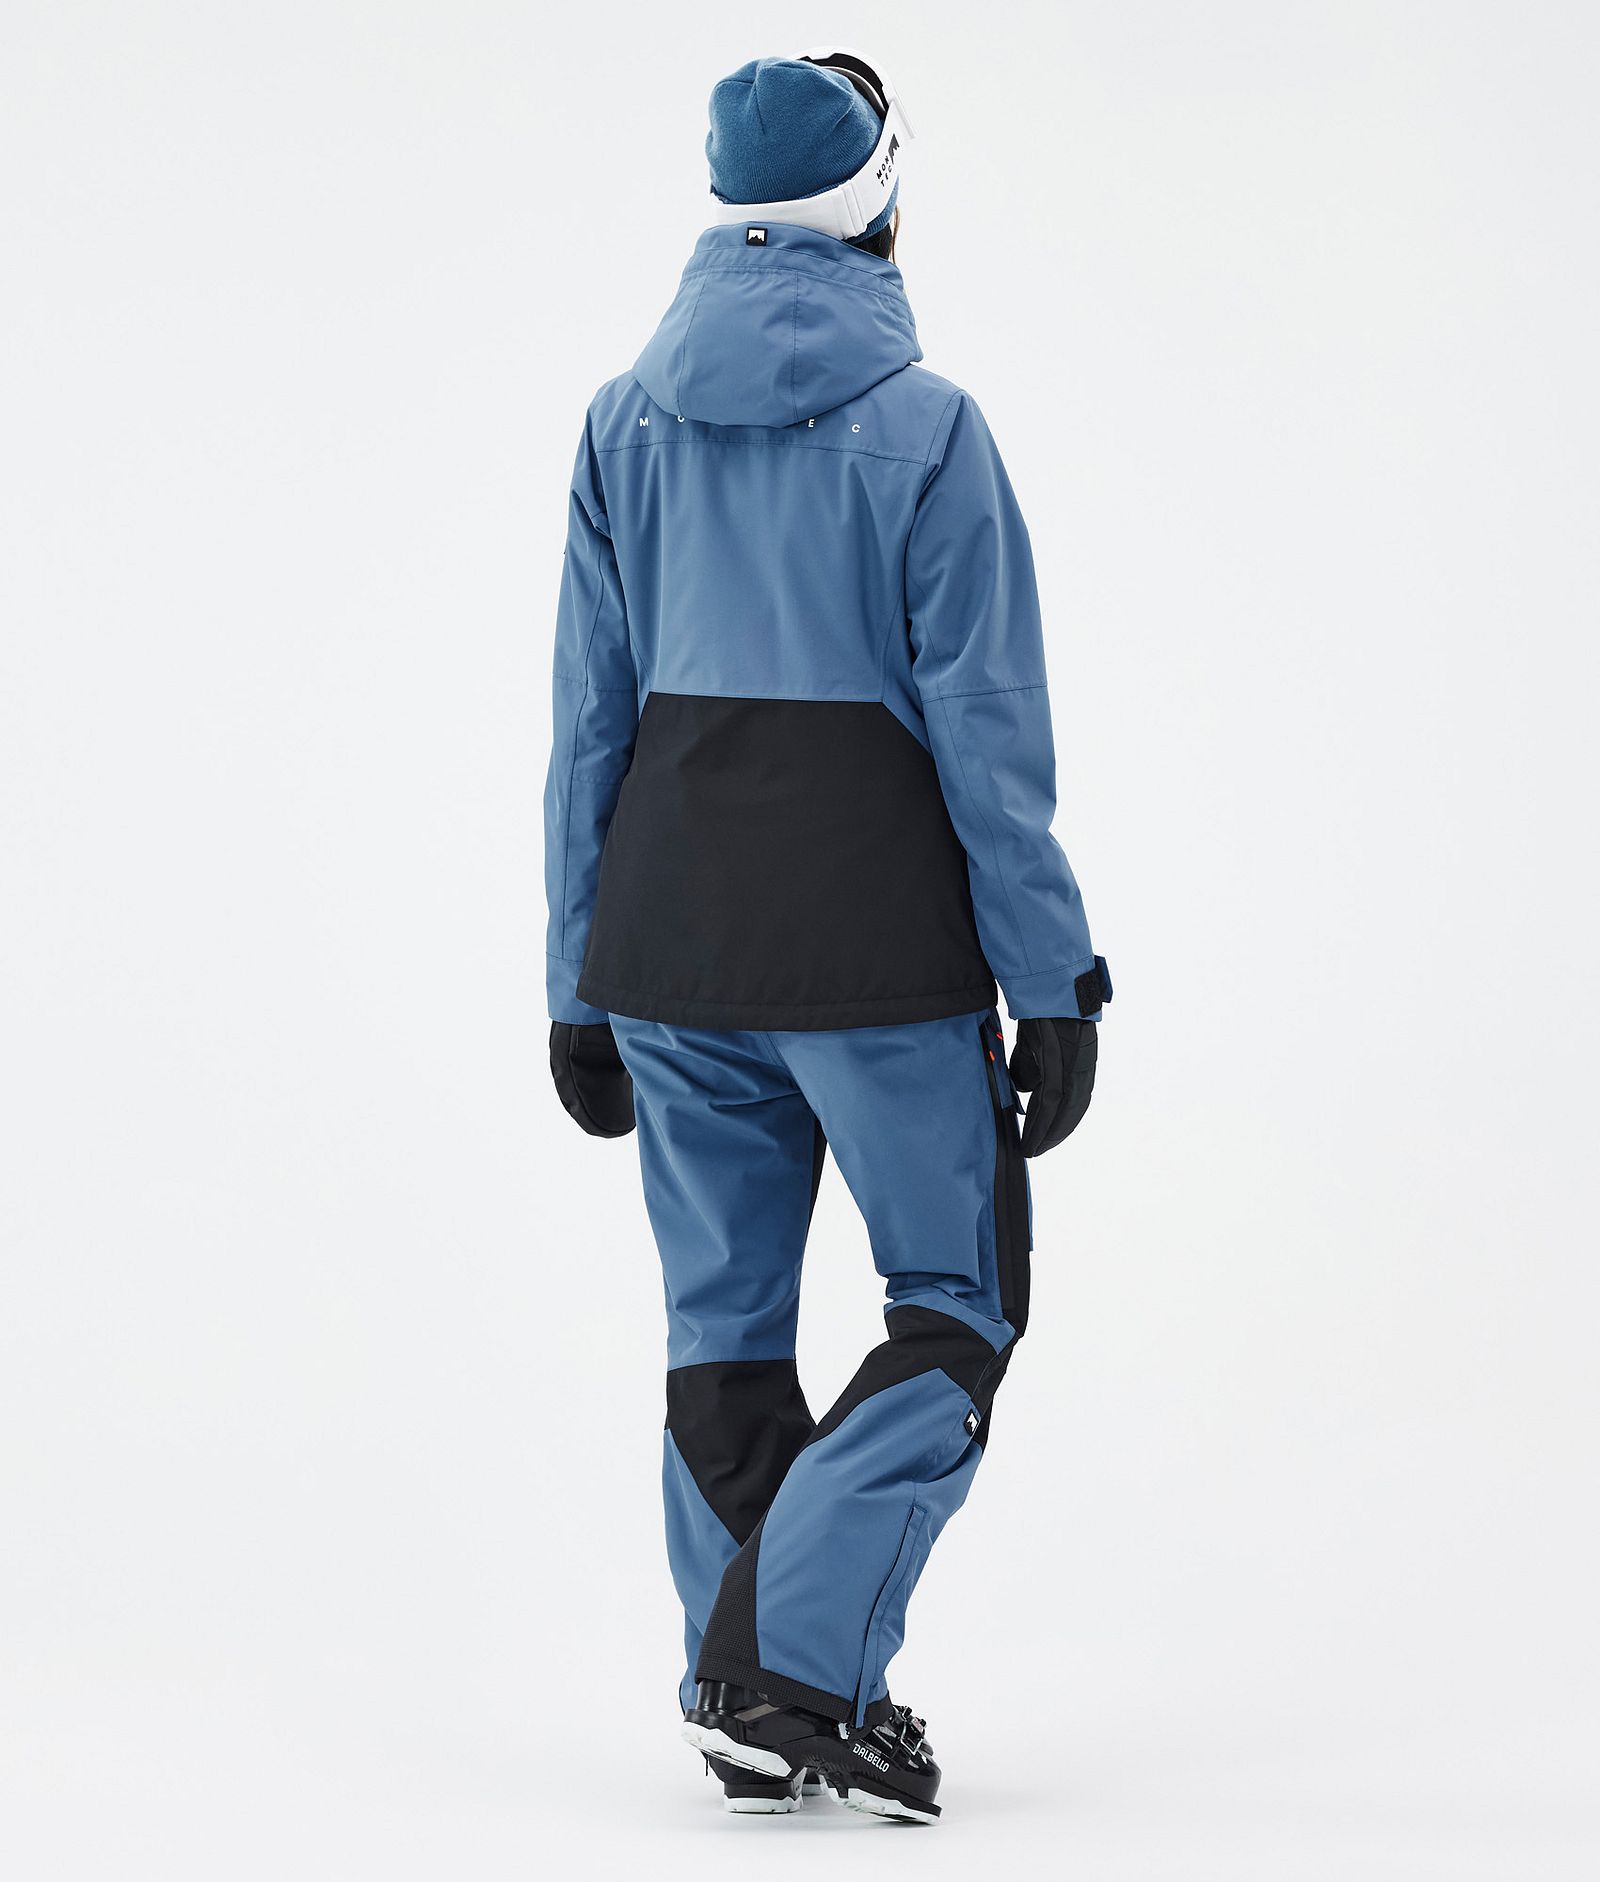 Montec Moss W Outfit Sci Donna Blue Steel/Black, Image 2 of 2